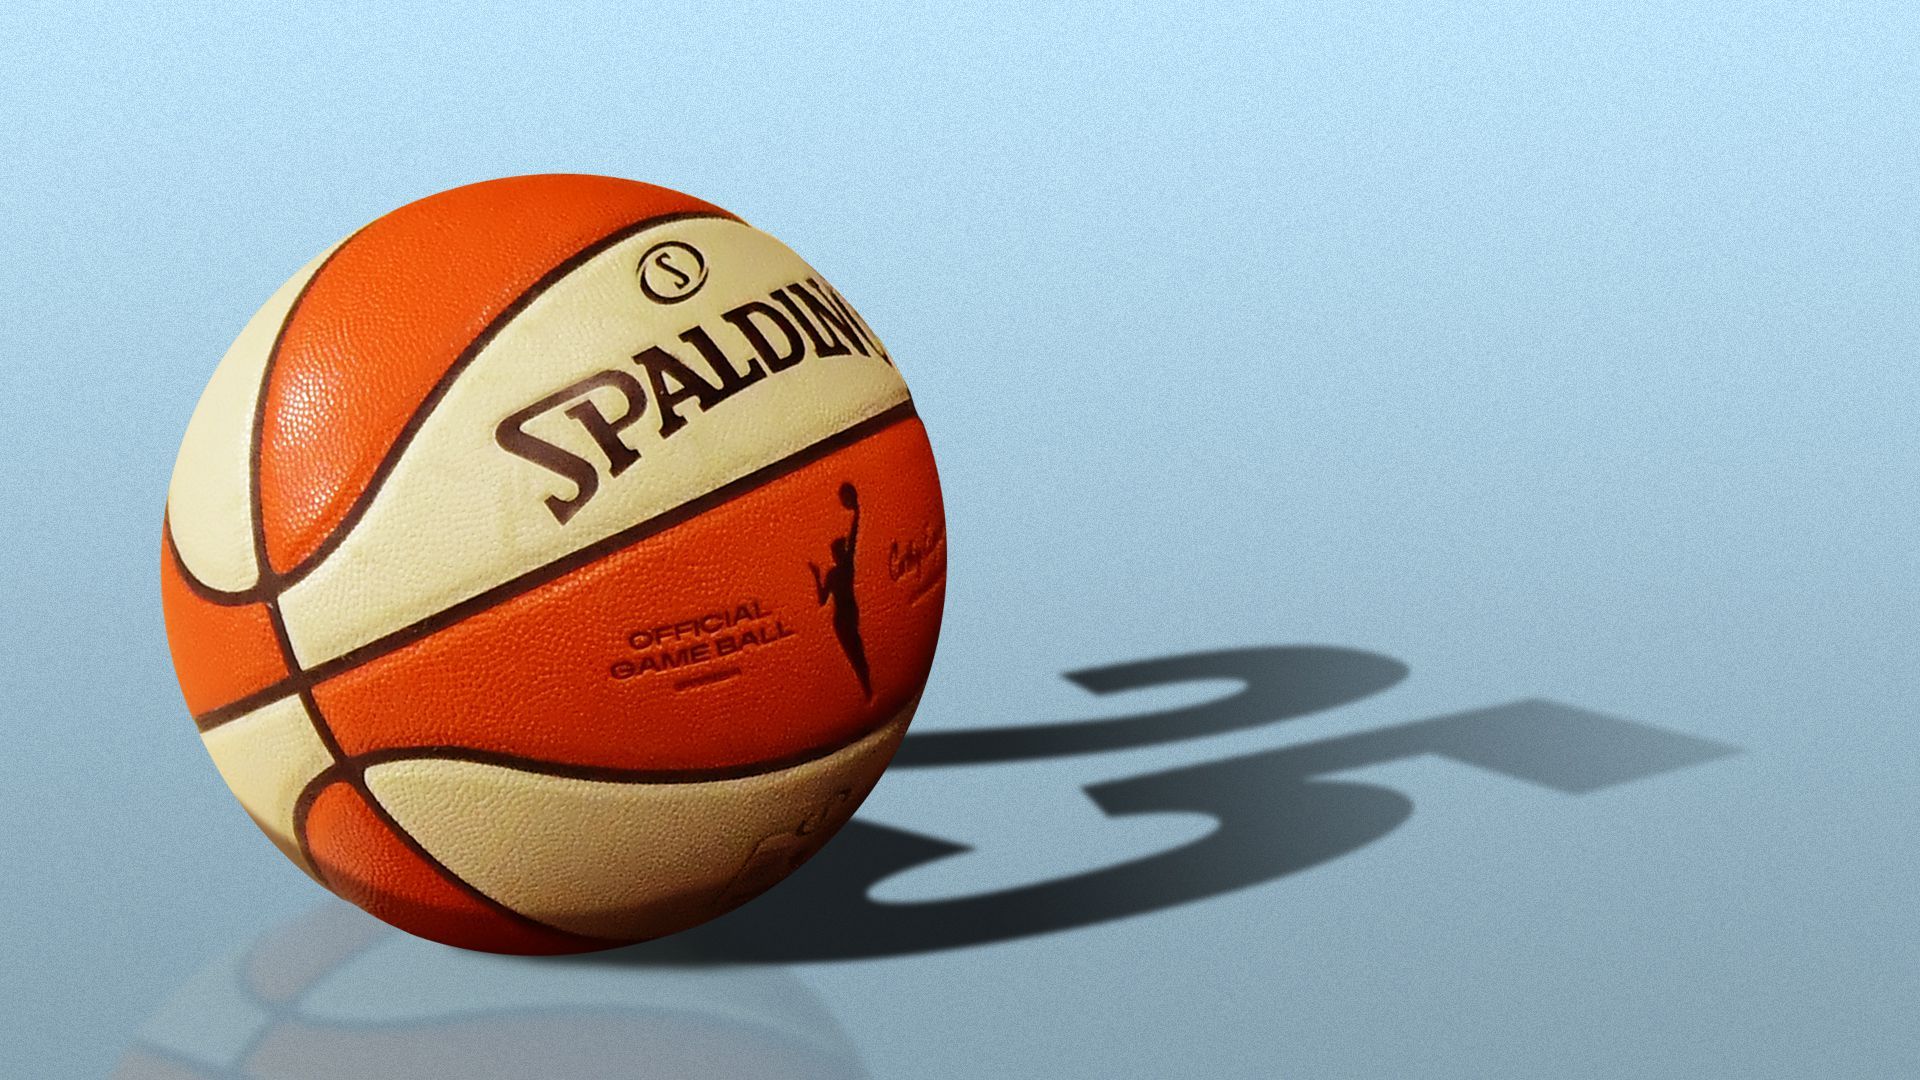 Illustration of a WNBA basketball casting a shadow that reads 